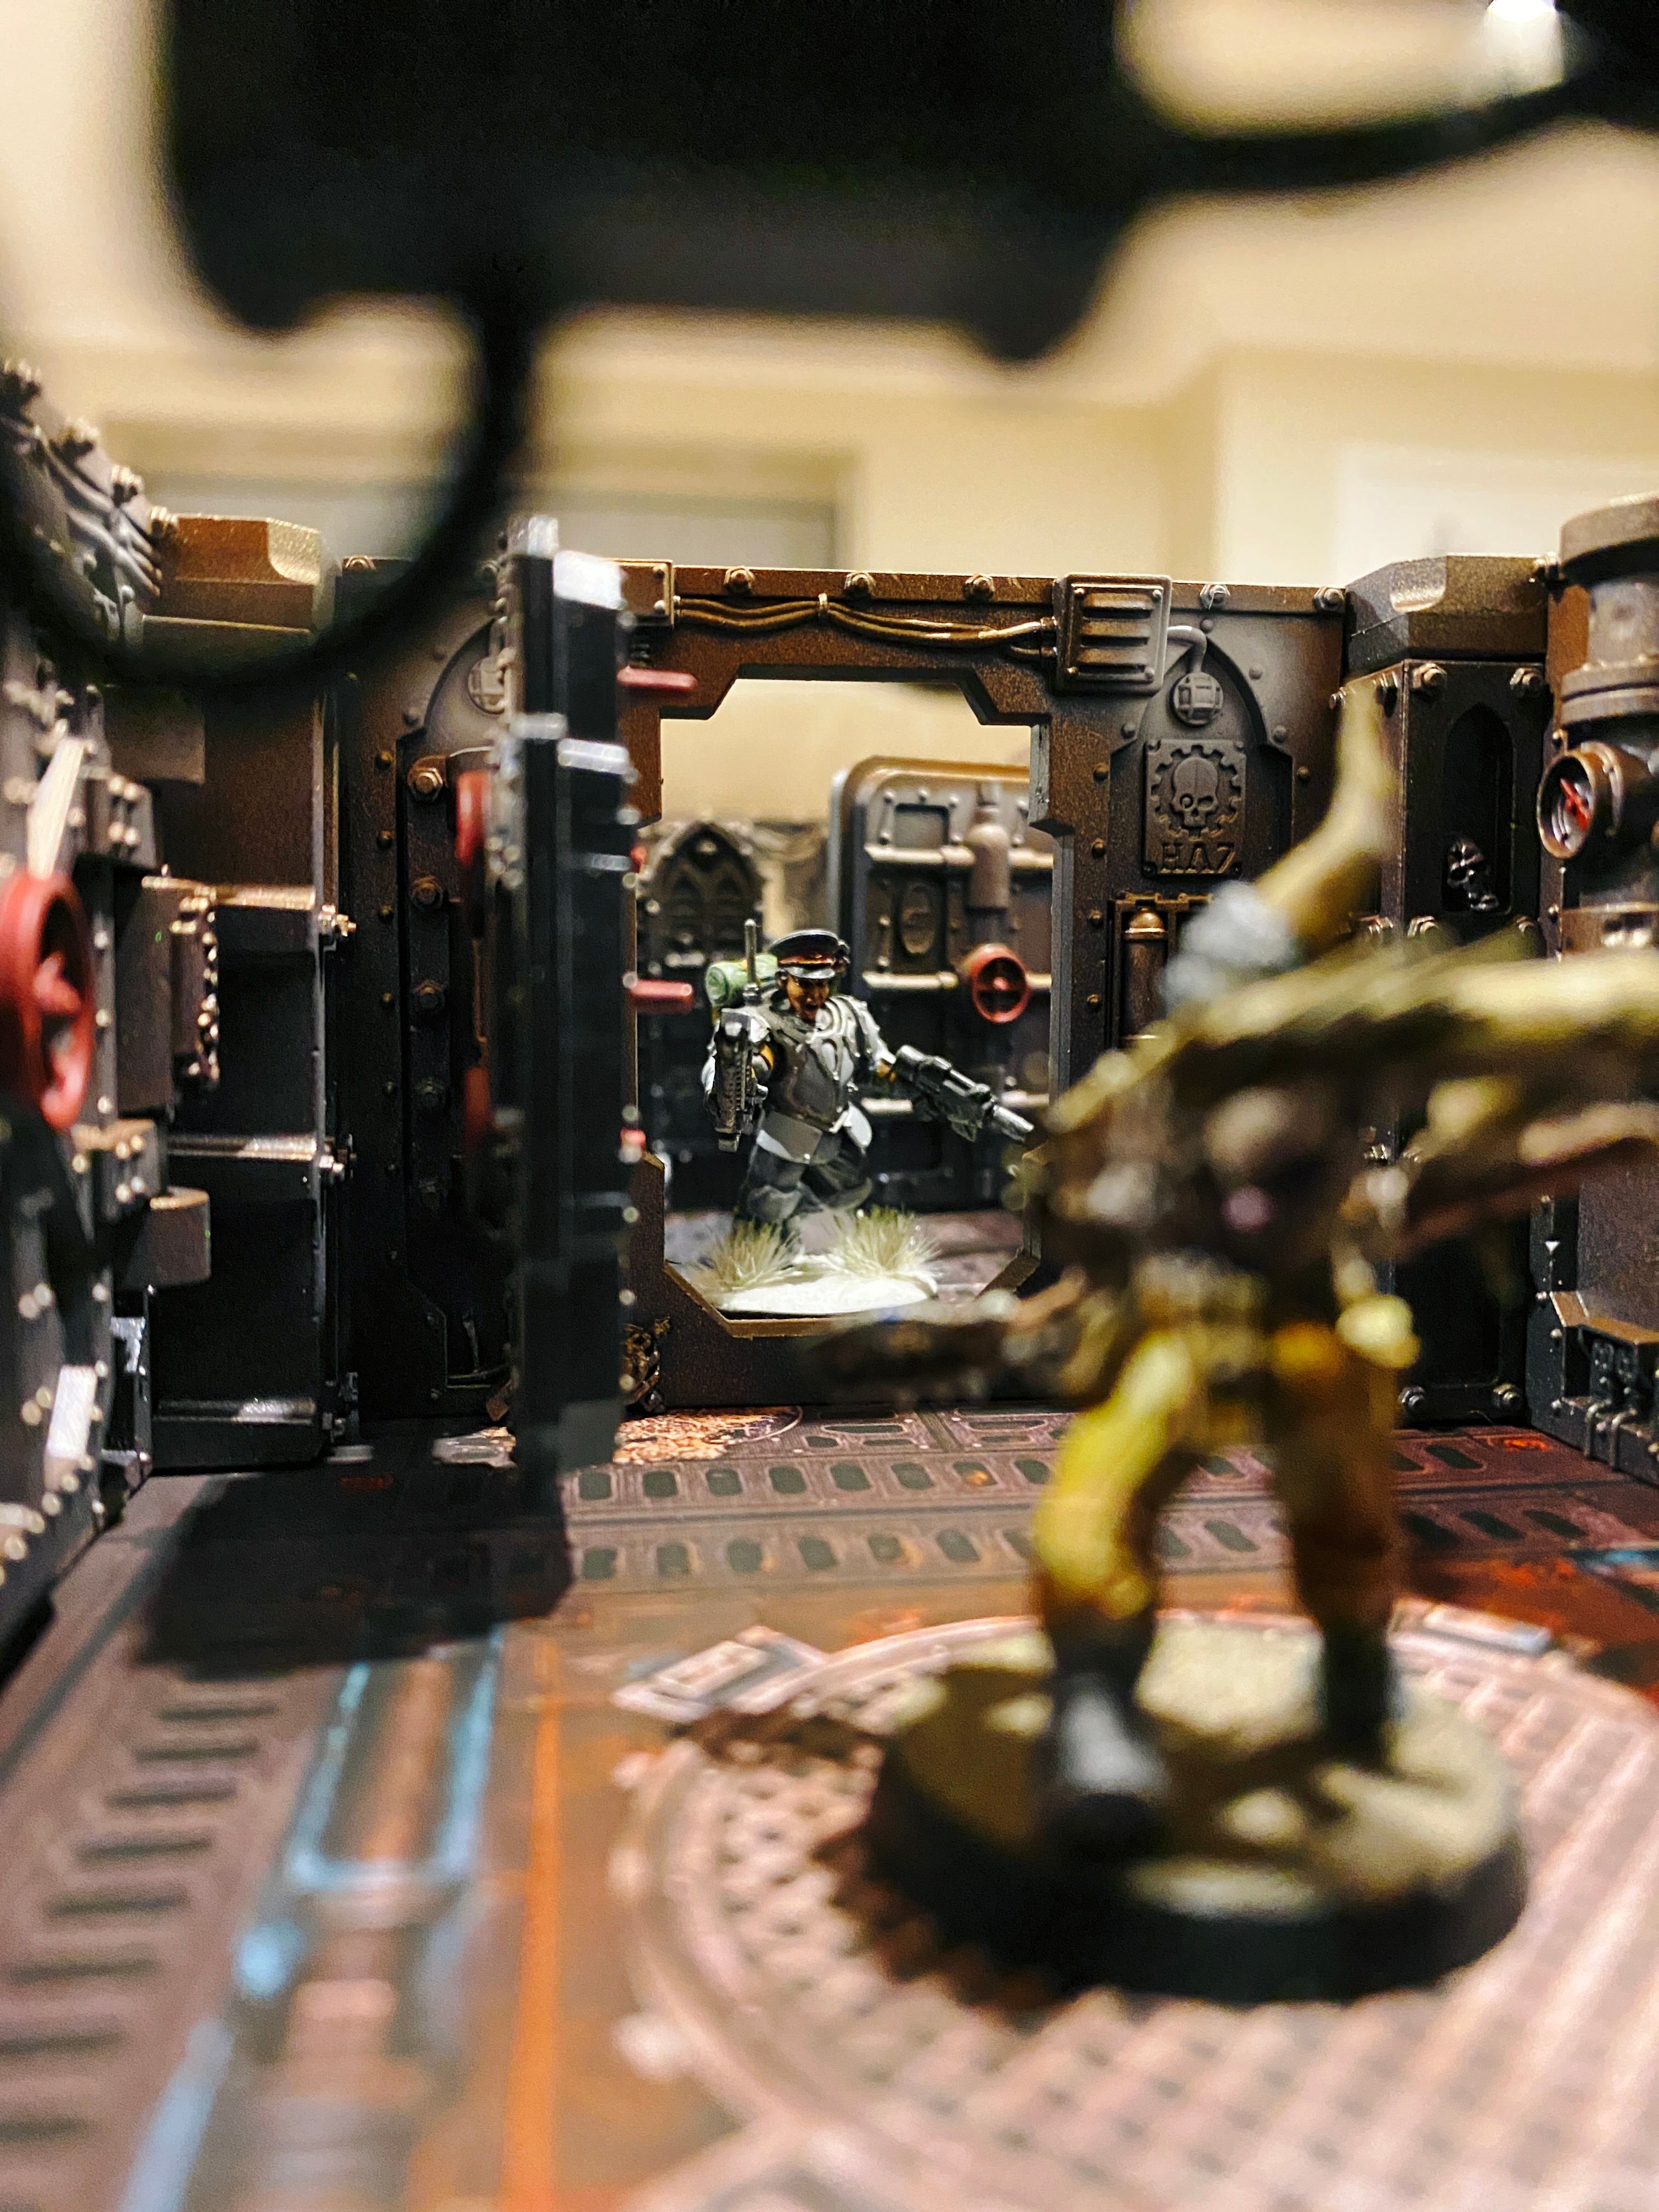 Another even closer-upper shot, taken from the point of view of one of the miniatures. A different female warrior in armour is pointing her gun through a hatchway at a Poxwalker, which is a gross pustle-covered zombie thing.